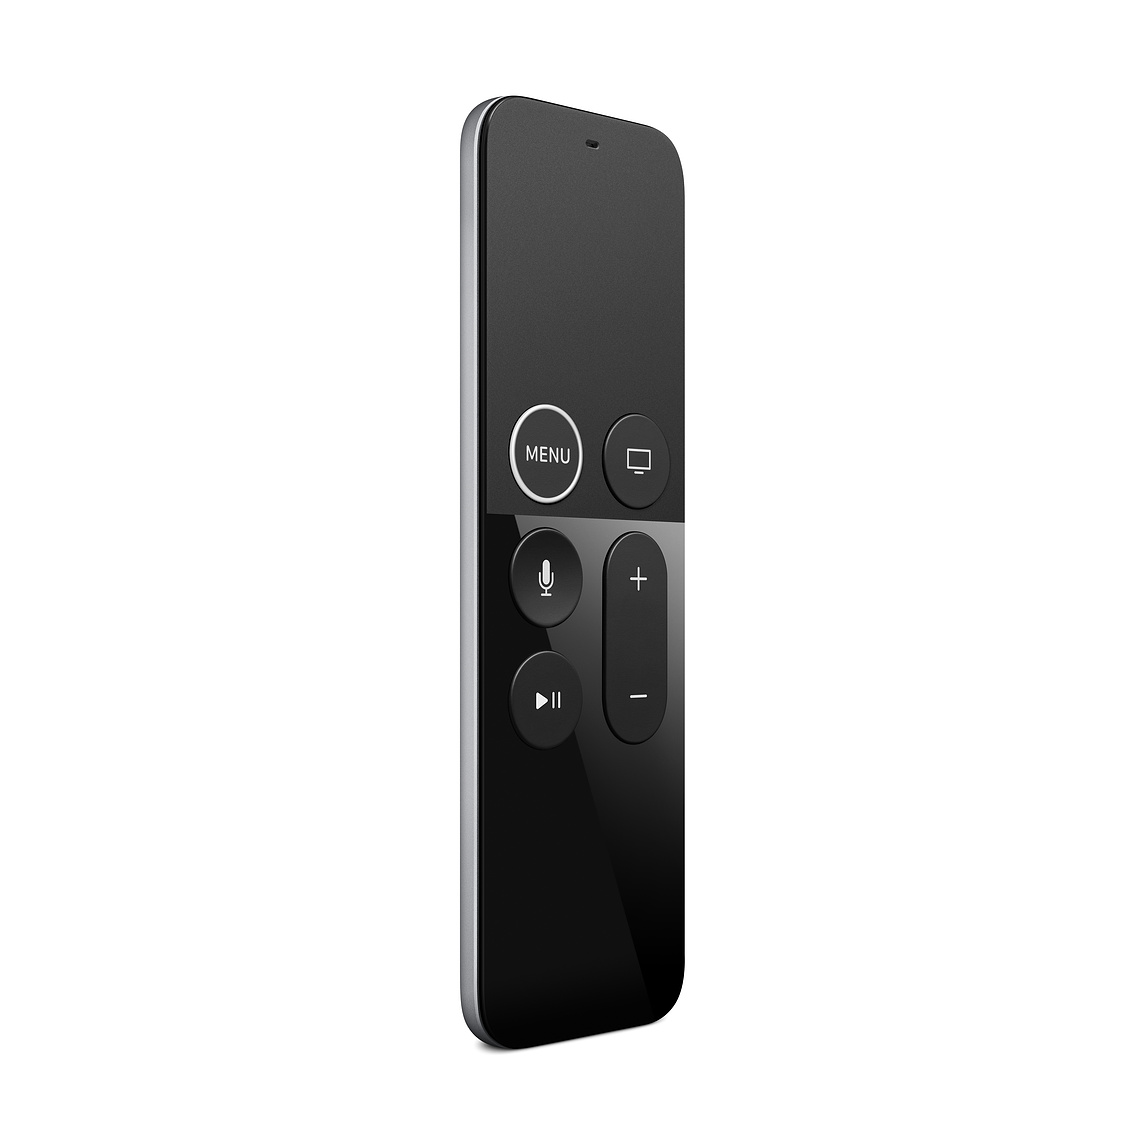 Op risico Voorzichtig Politiebureau Apple TV Remote: What are your options to control the Apple TV? - 9to5Mac